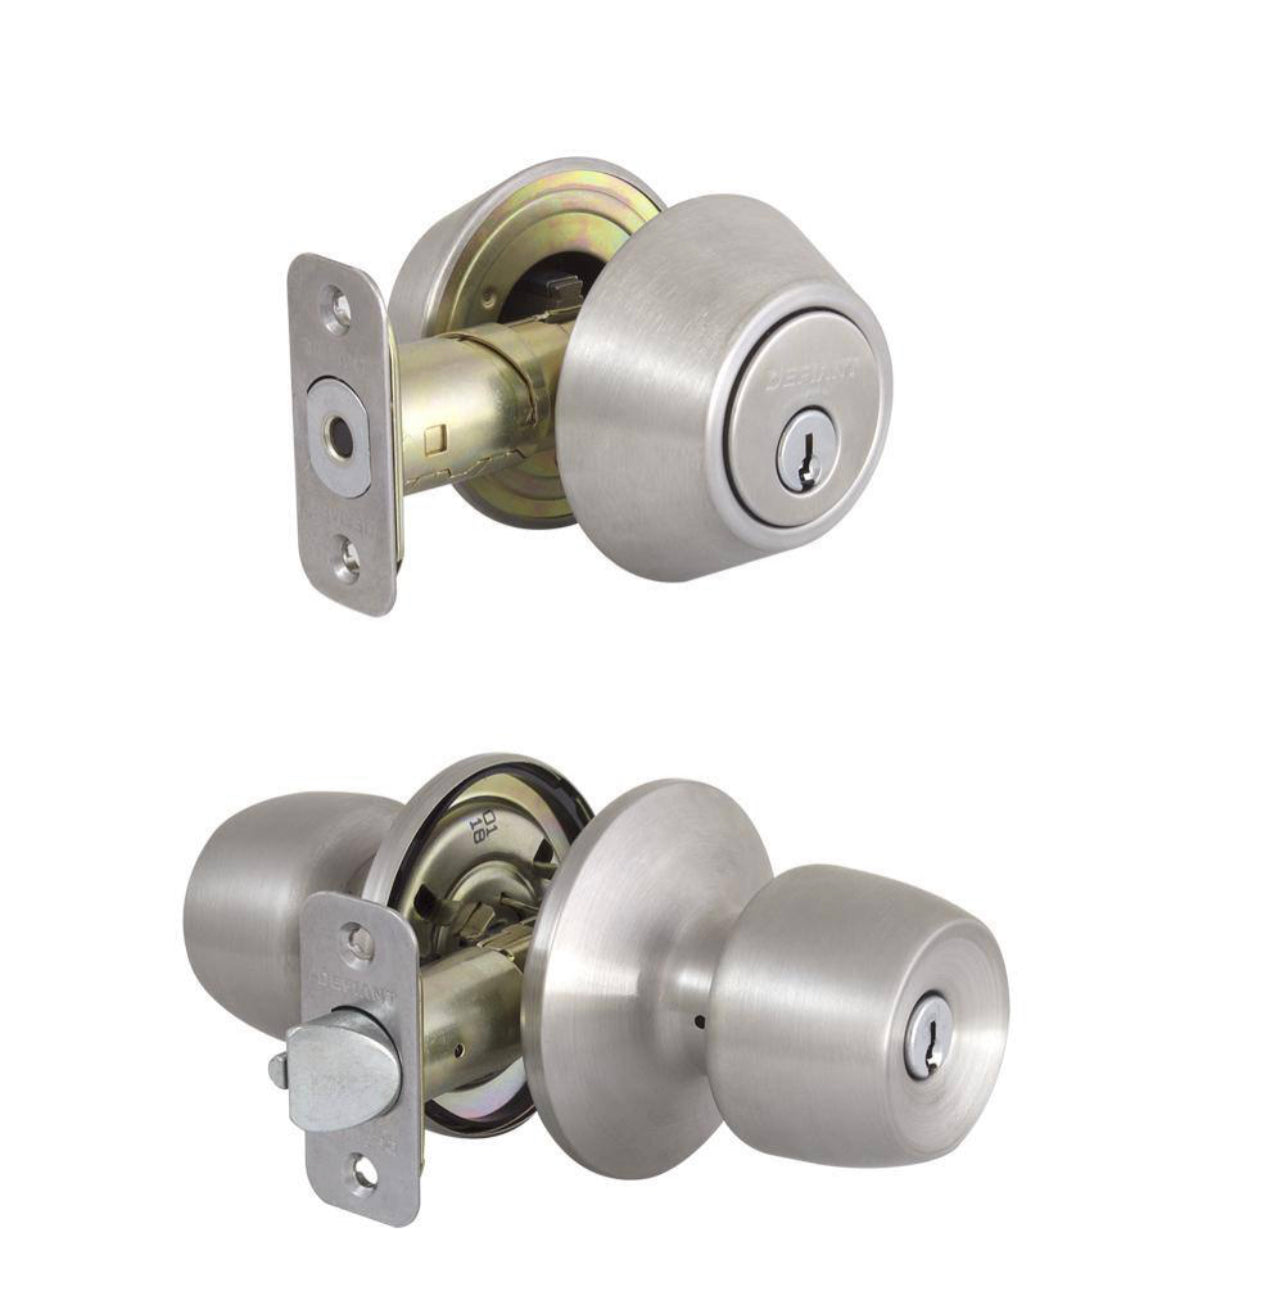 Defiant Brandywine Stainless Steel Combo Pack with Double Cylinder Deadbolt Damaged Box